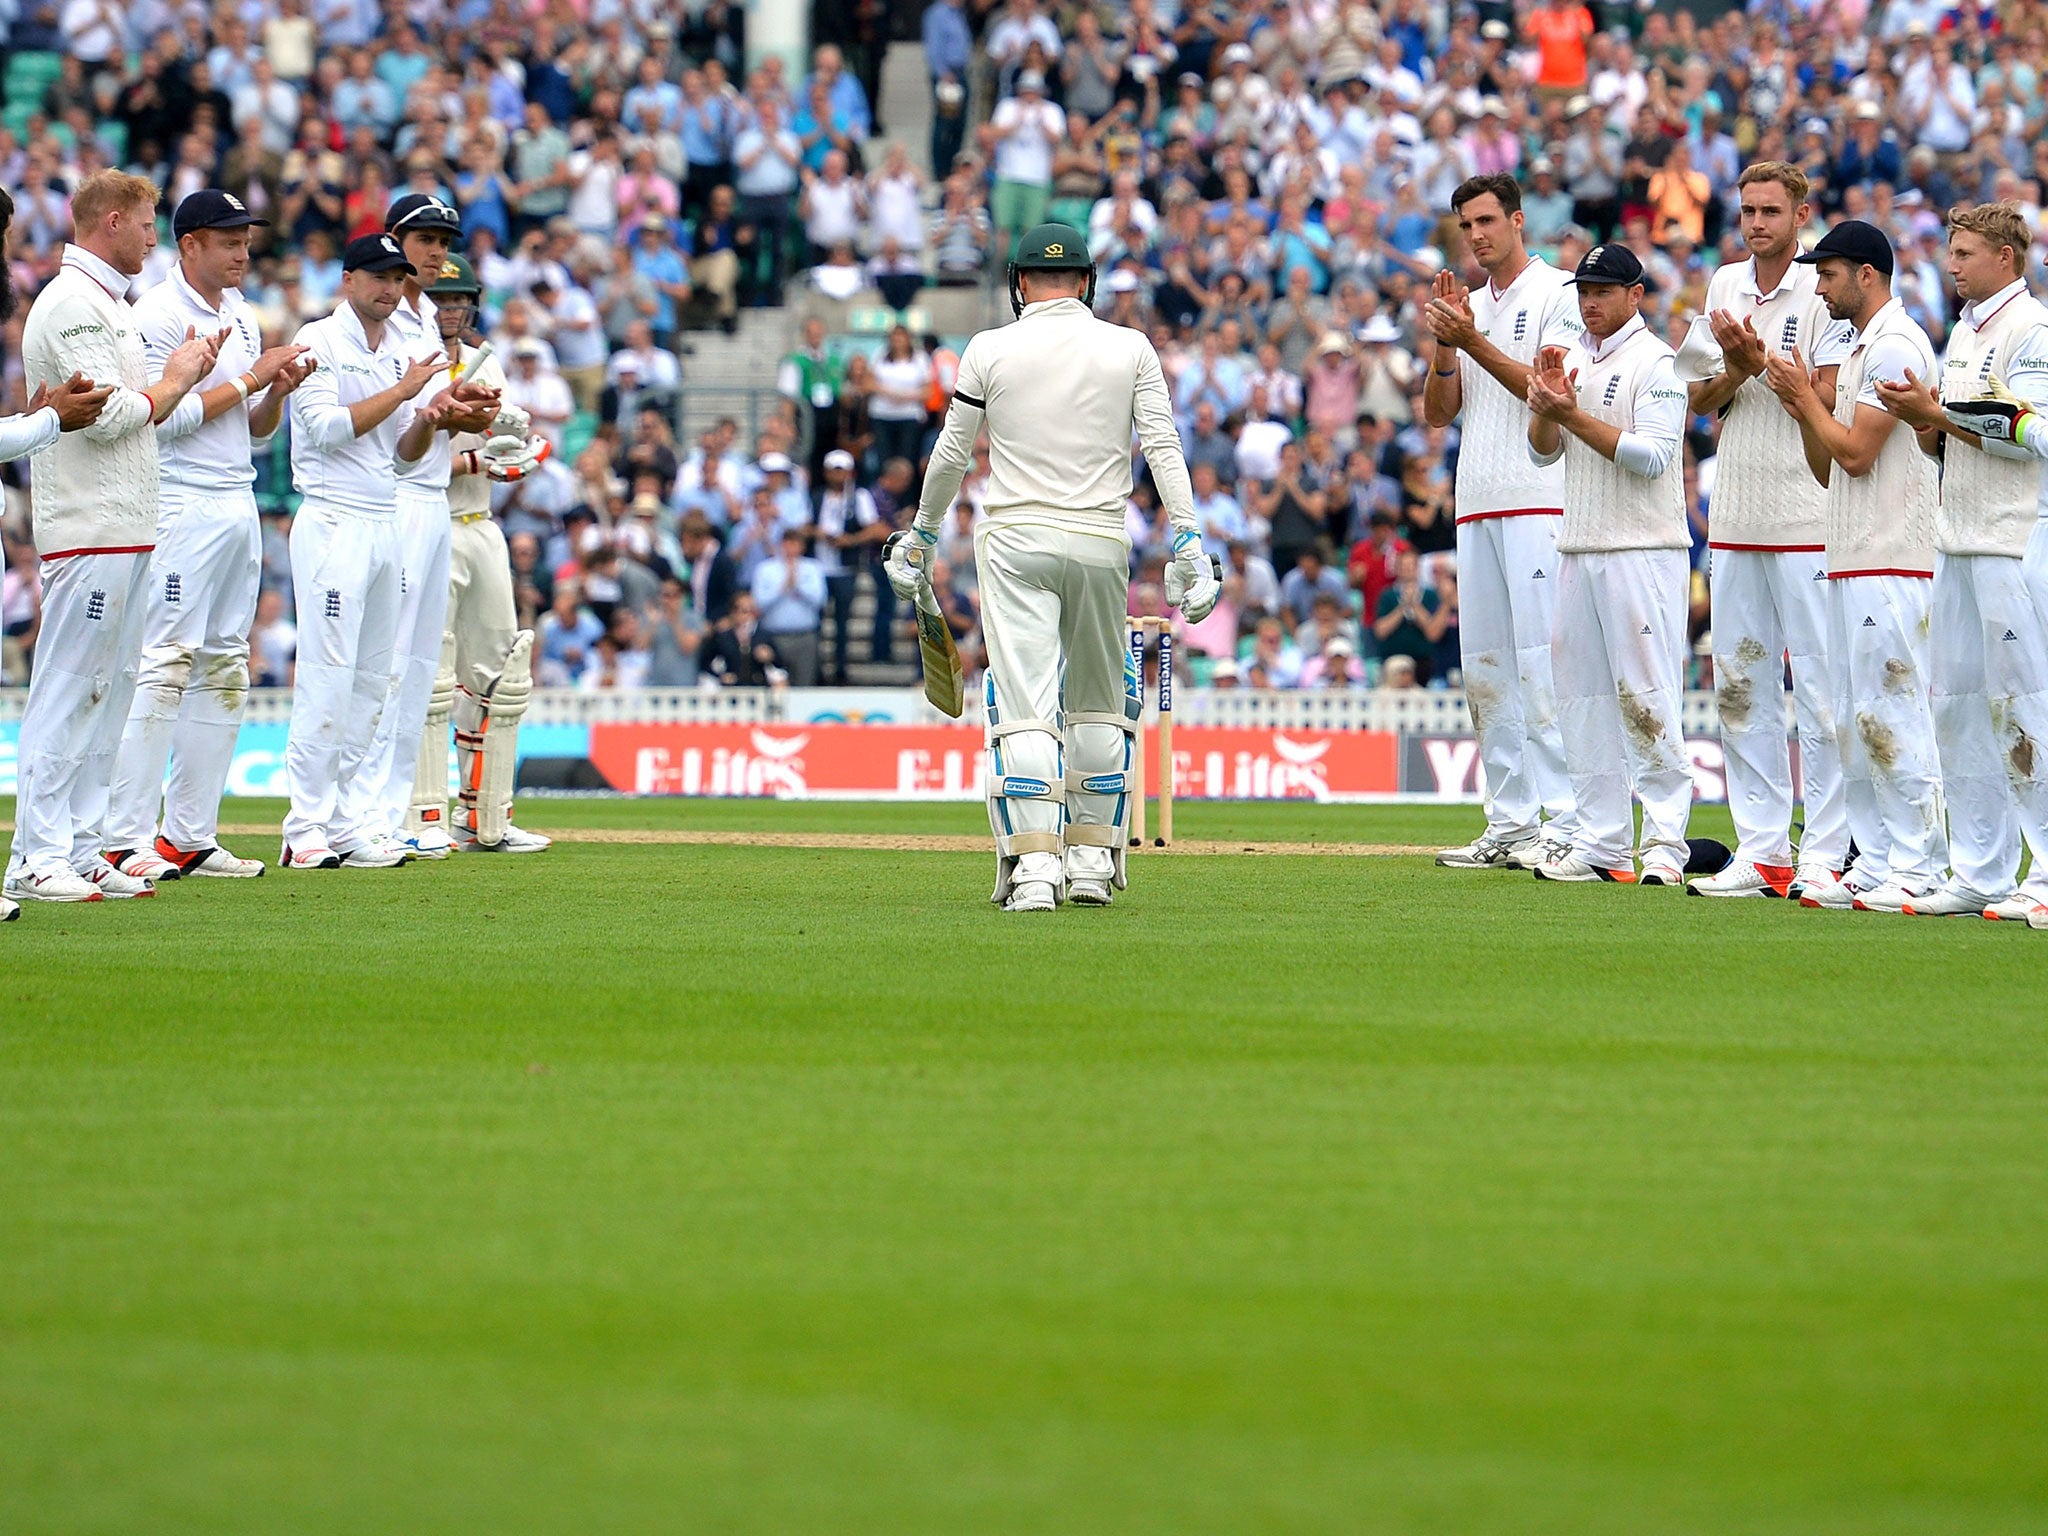 England give Australia captain Michael Clarke a guard of honour as he walks out for his first innings